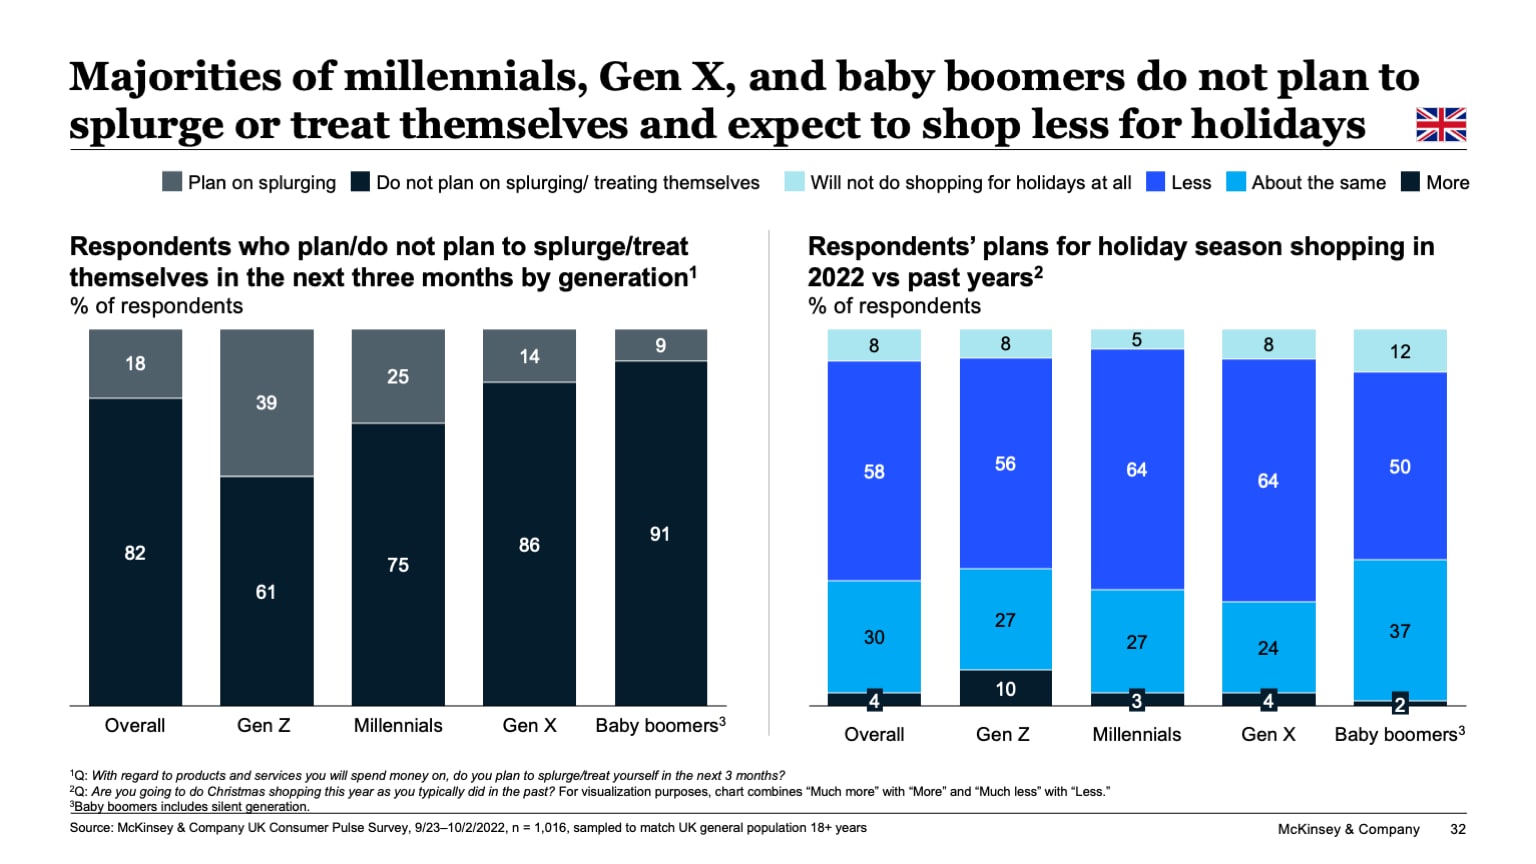 Majorities of millennials, Gen X, and baby boomers do not plan to splurge or treat themselves and expect to shop less for holidays